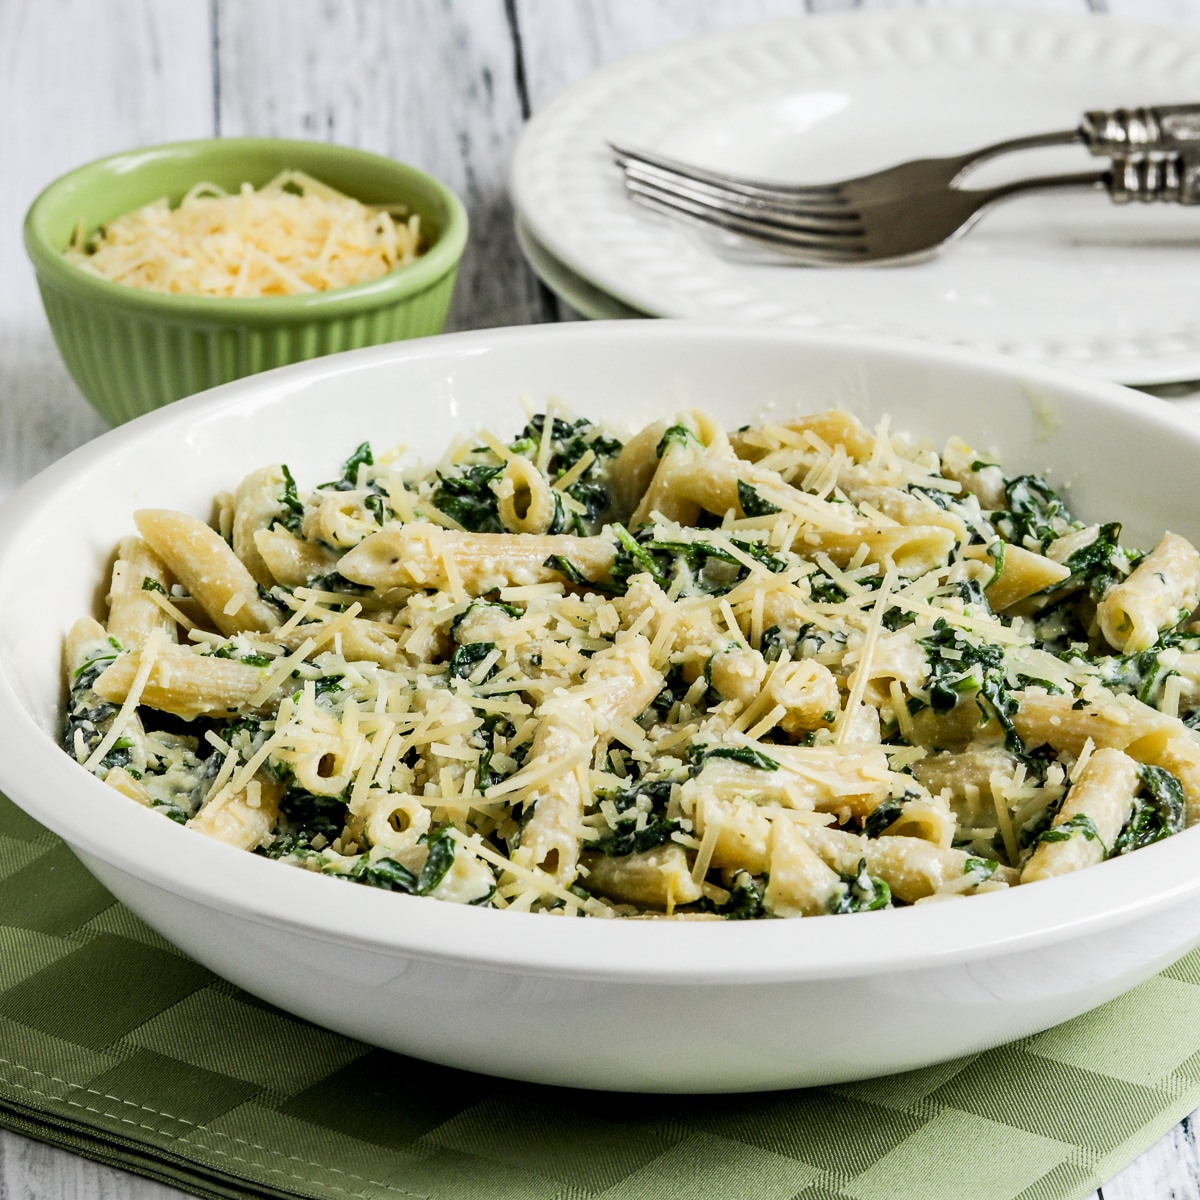 Pasta with Creamy Arugula Sauce in serving bowl with plates, forks, and extra Parmesan.